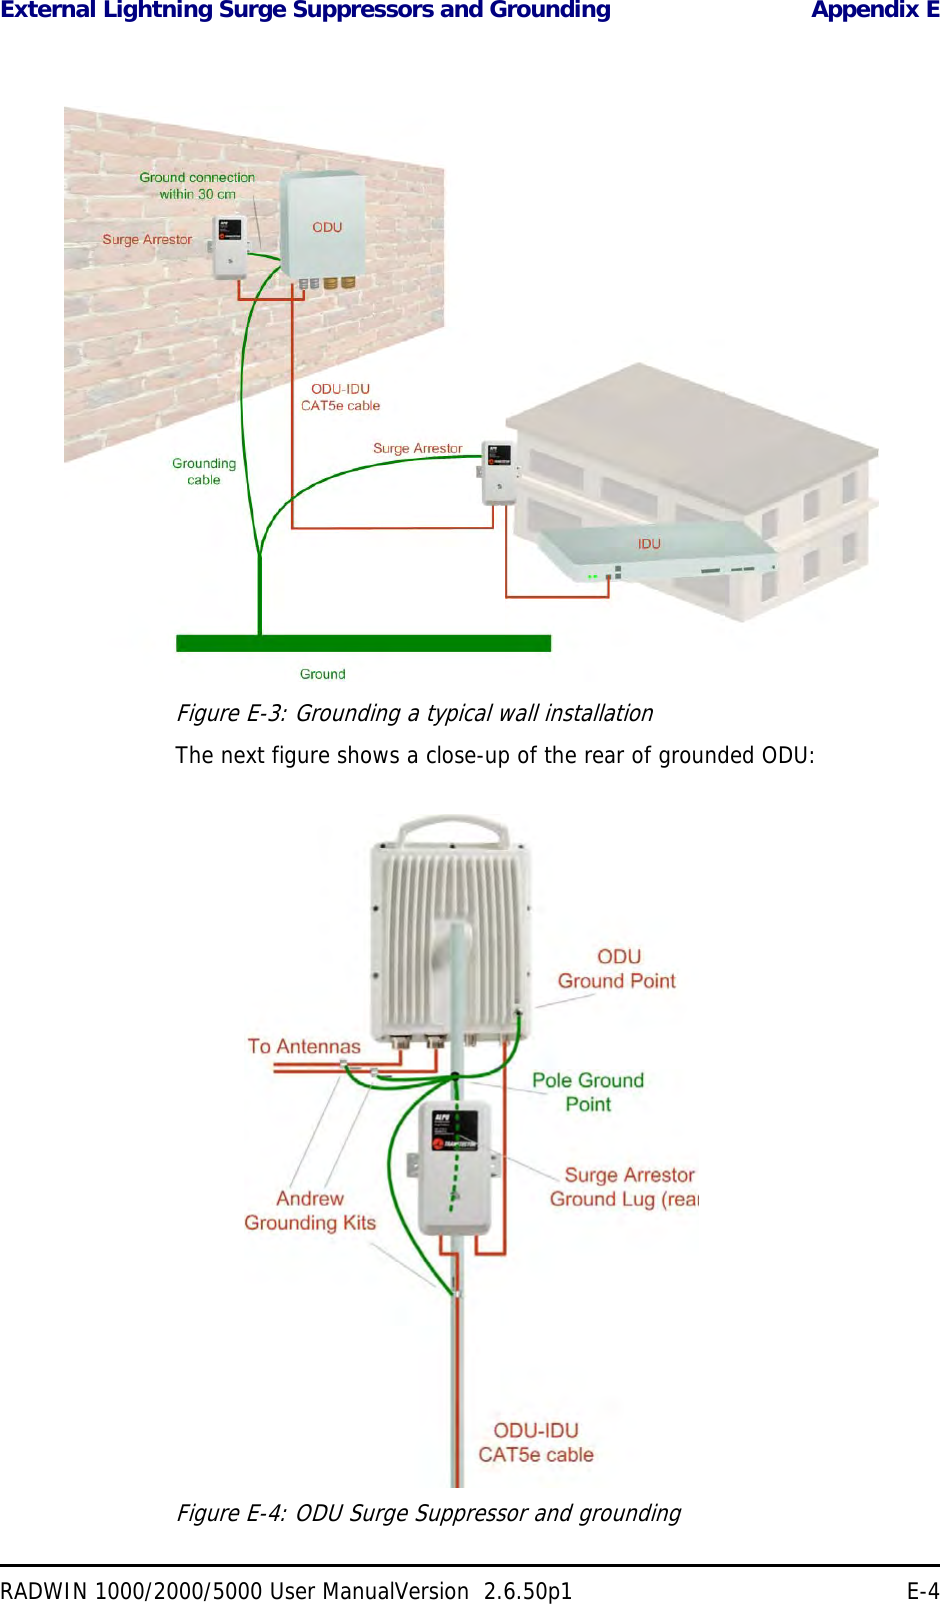 External Lightning Surge Suppressors and Grounding Appendix ERADWIN 1000/2000/5000 User ManualVersion  2.6.50p1 E-4Figure E-3: Grounding a typical wall installationThe next figure shows a close-up of the rear of grounded ODU:Figure E-4: ODU Surge Suppressor and grounding